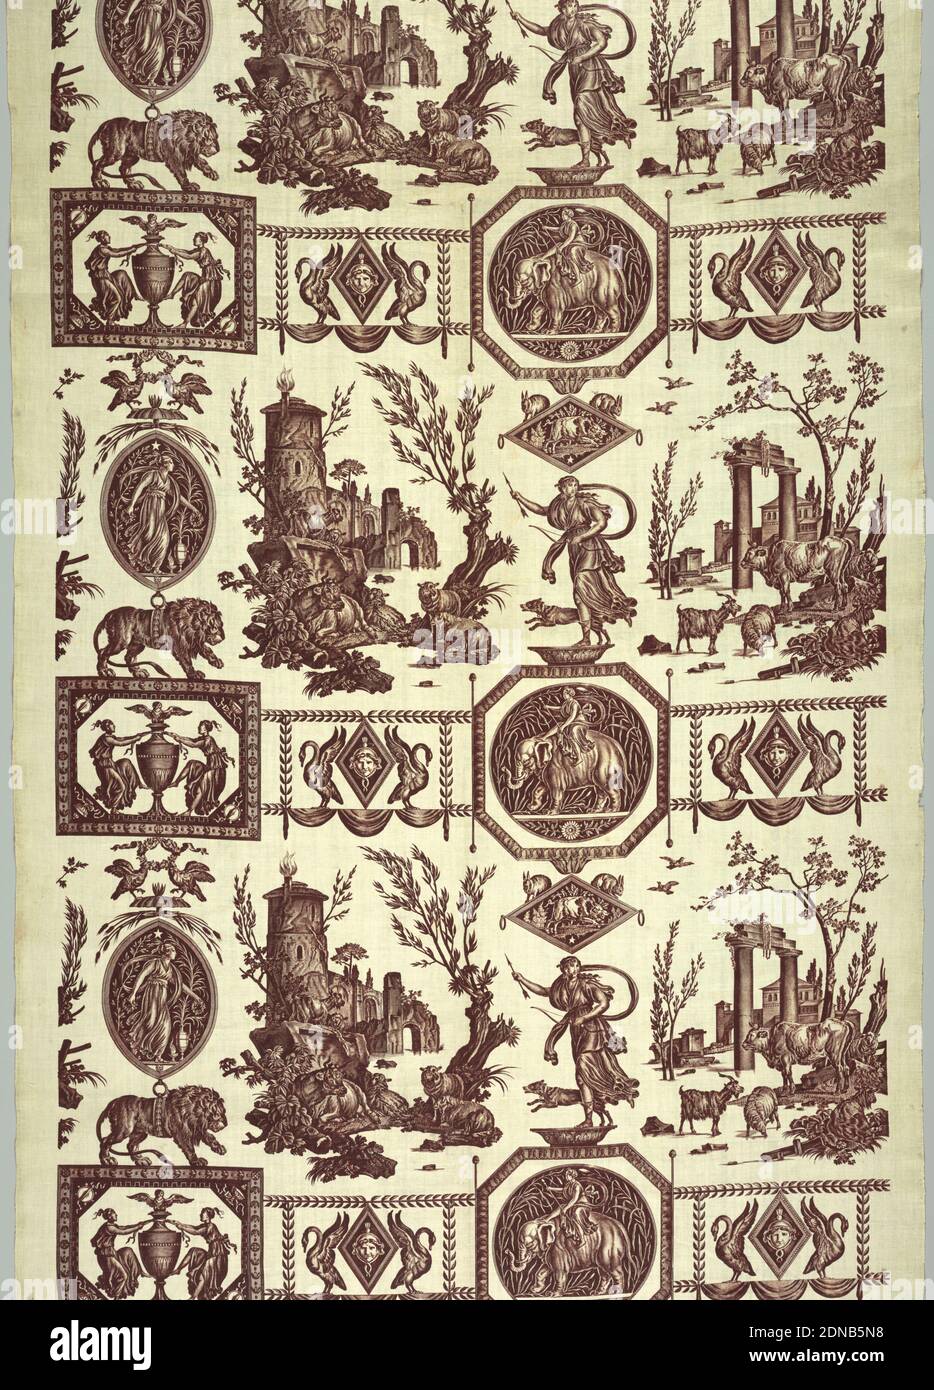 Dianne Chasseresse, Jean-Baptiste Huët, (French, 1745–1811), Oberkampf & Cie., (Jouy-en-Josas, France, 1759–1815), Medium: plain weave cotton Technique: printed by engraved plate (the short height of the repeat indicates that the shorter printing plate which came into use at the turn on the century was used; original glaze is visible), Design in brown on white background. Figure of Diana as a huntress with various classical medallions., Jouy-en-Josas, France, ca. 1798, printed, dyed & painted textiles, Textile with chef de piece, Textile with chef de piece Stock Photo